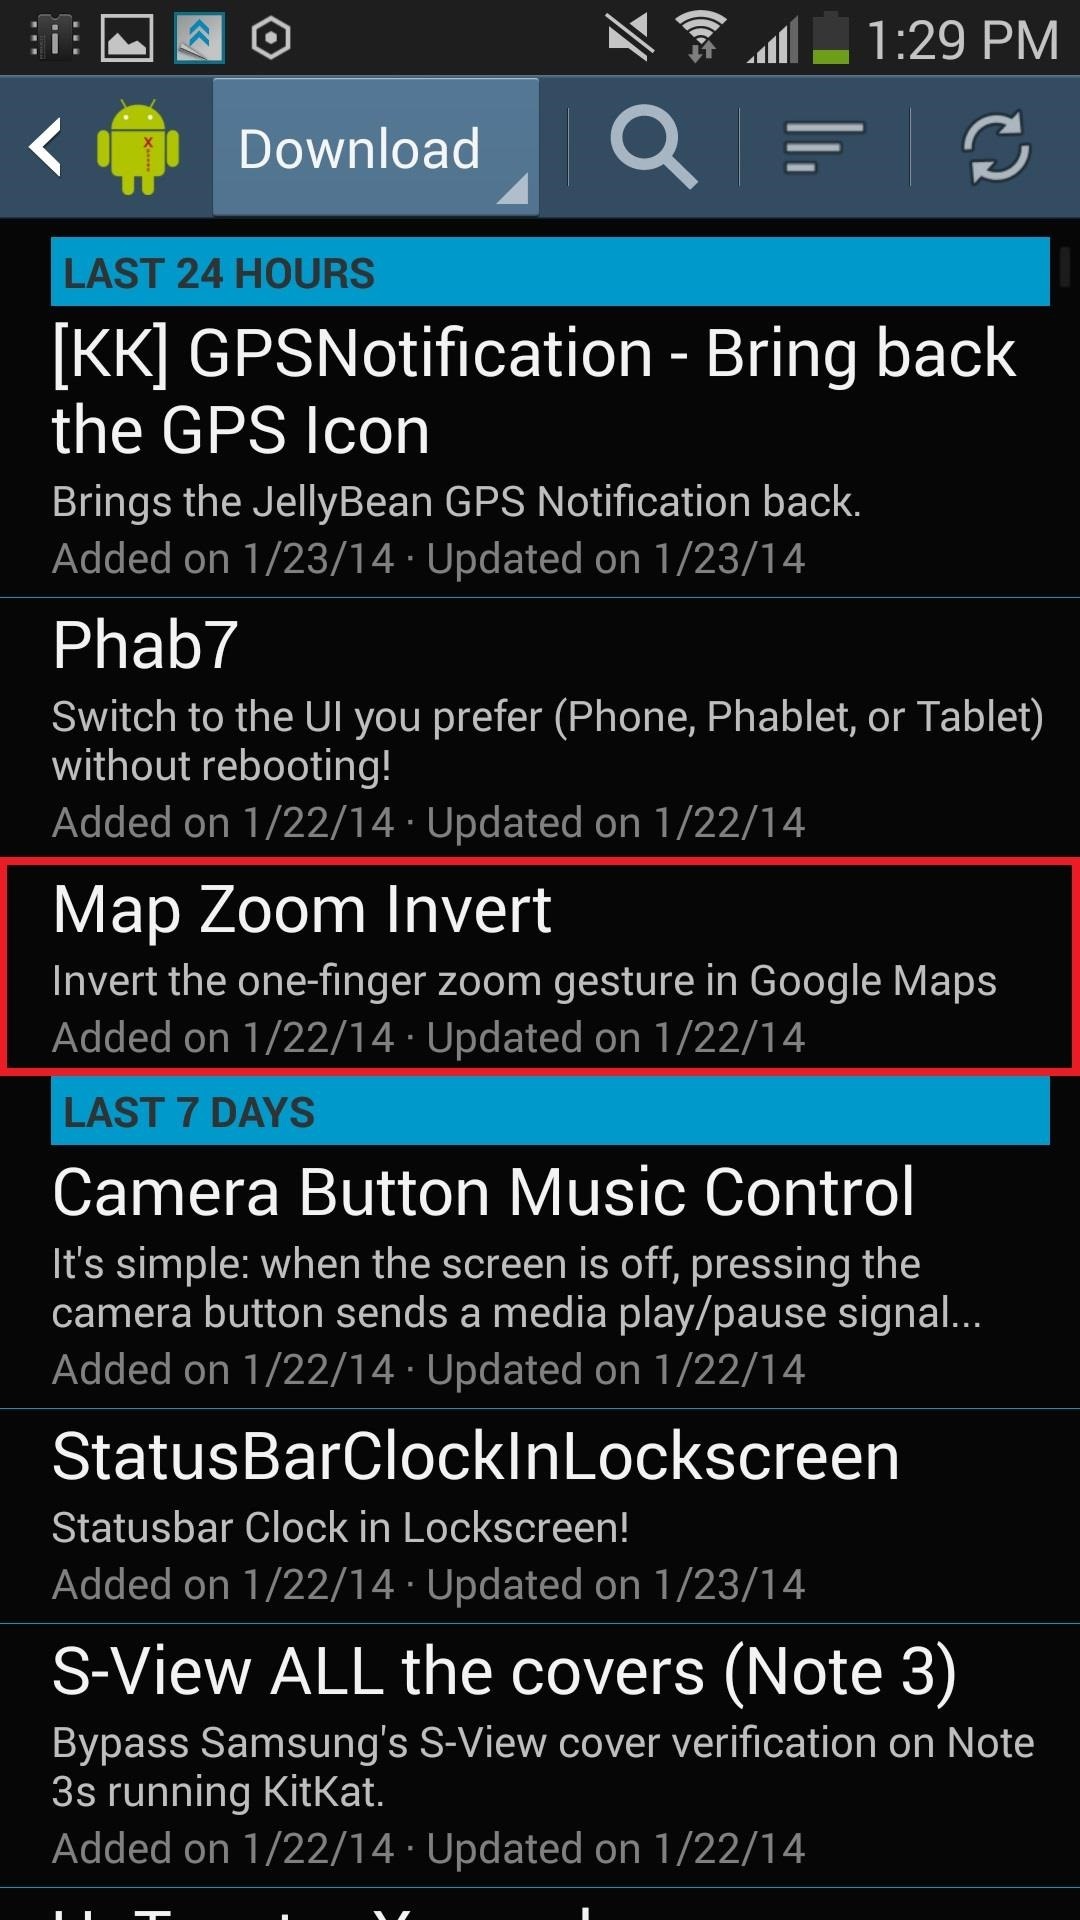 How to Revert Back to Google Map's Original One-Finger Zoom on the Galaxy Note 3